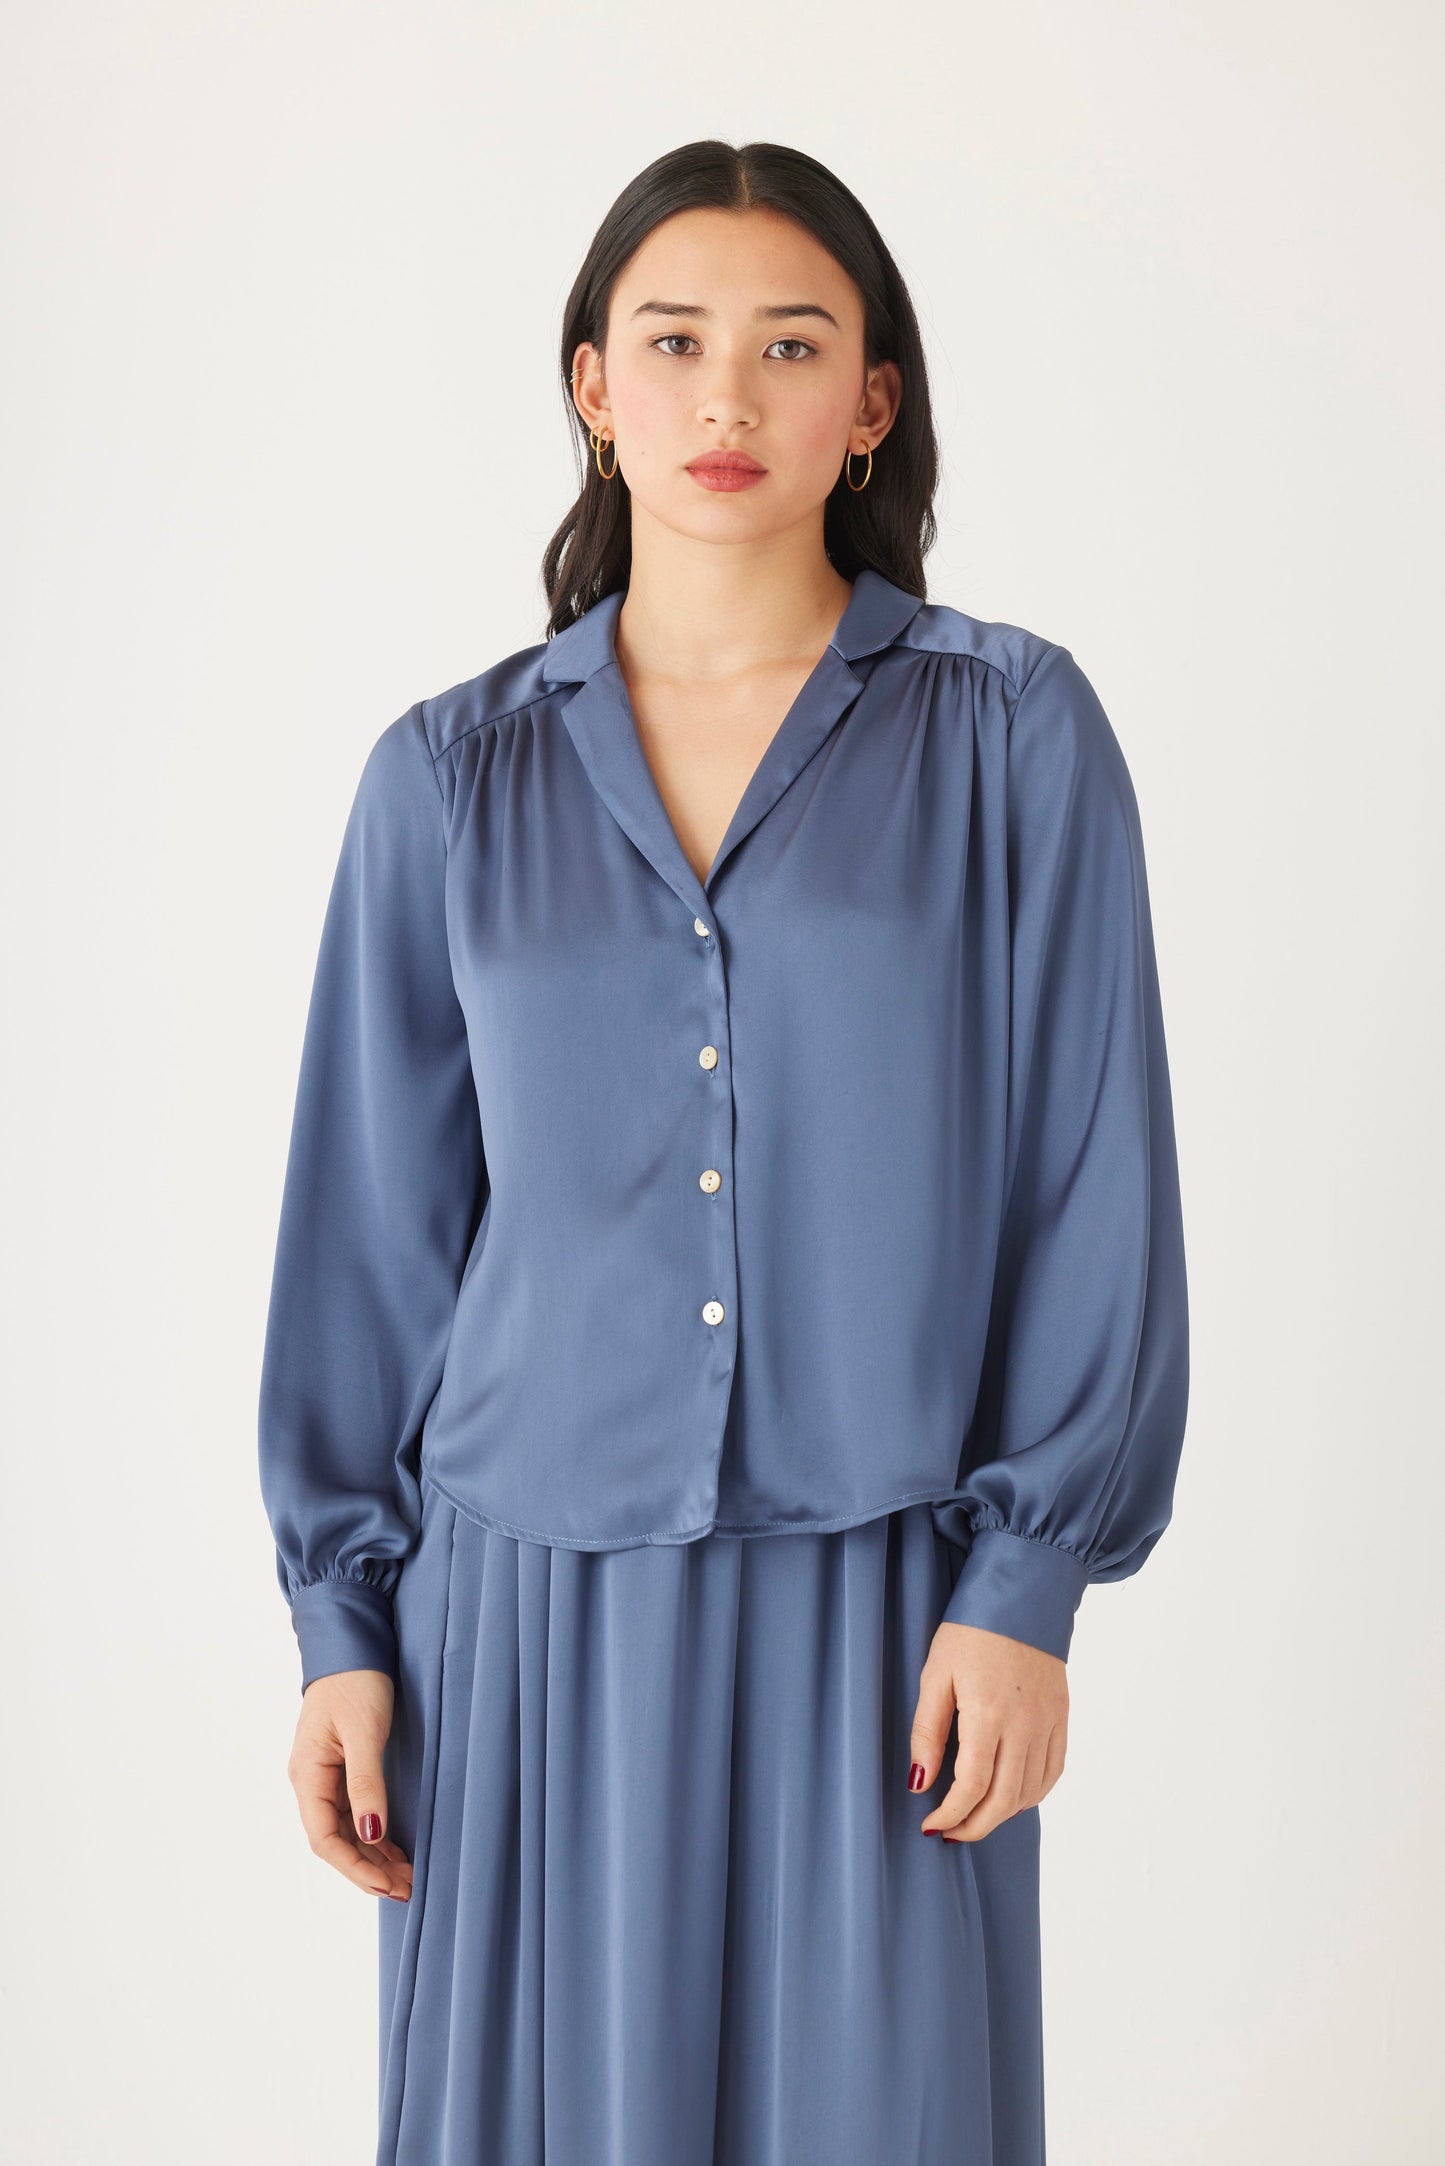 Rose Blouse in Japanese Charmeuse Blouse CHRISTINE ALCALAY Slate Blue Extra Small 